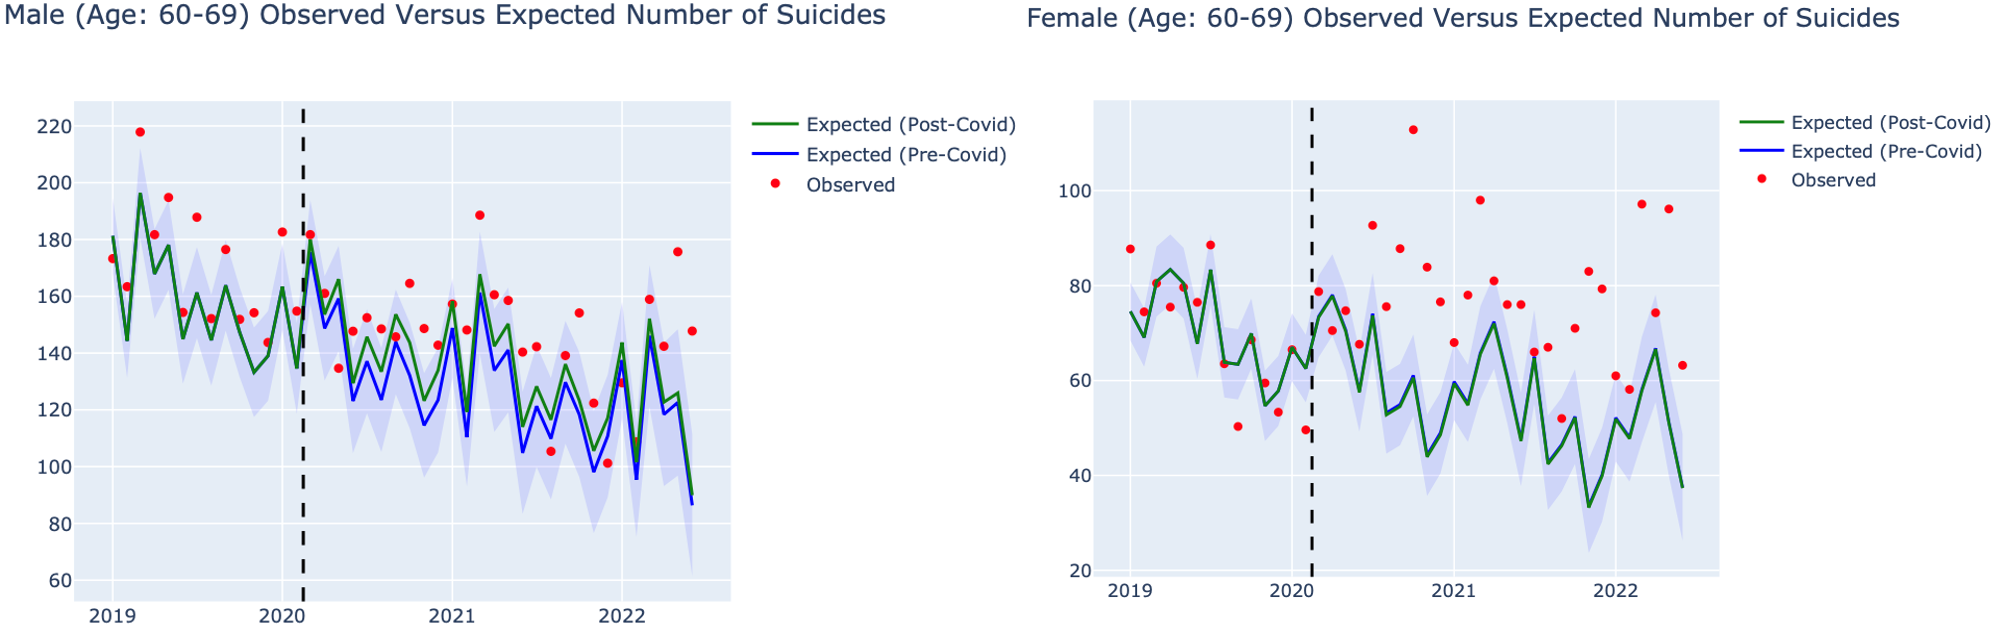 Excess suicides of the elderly (60-69 years old)during the pandemic